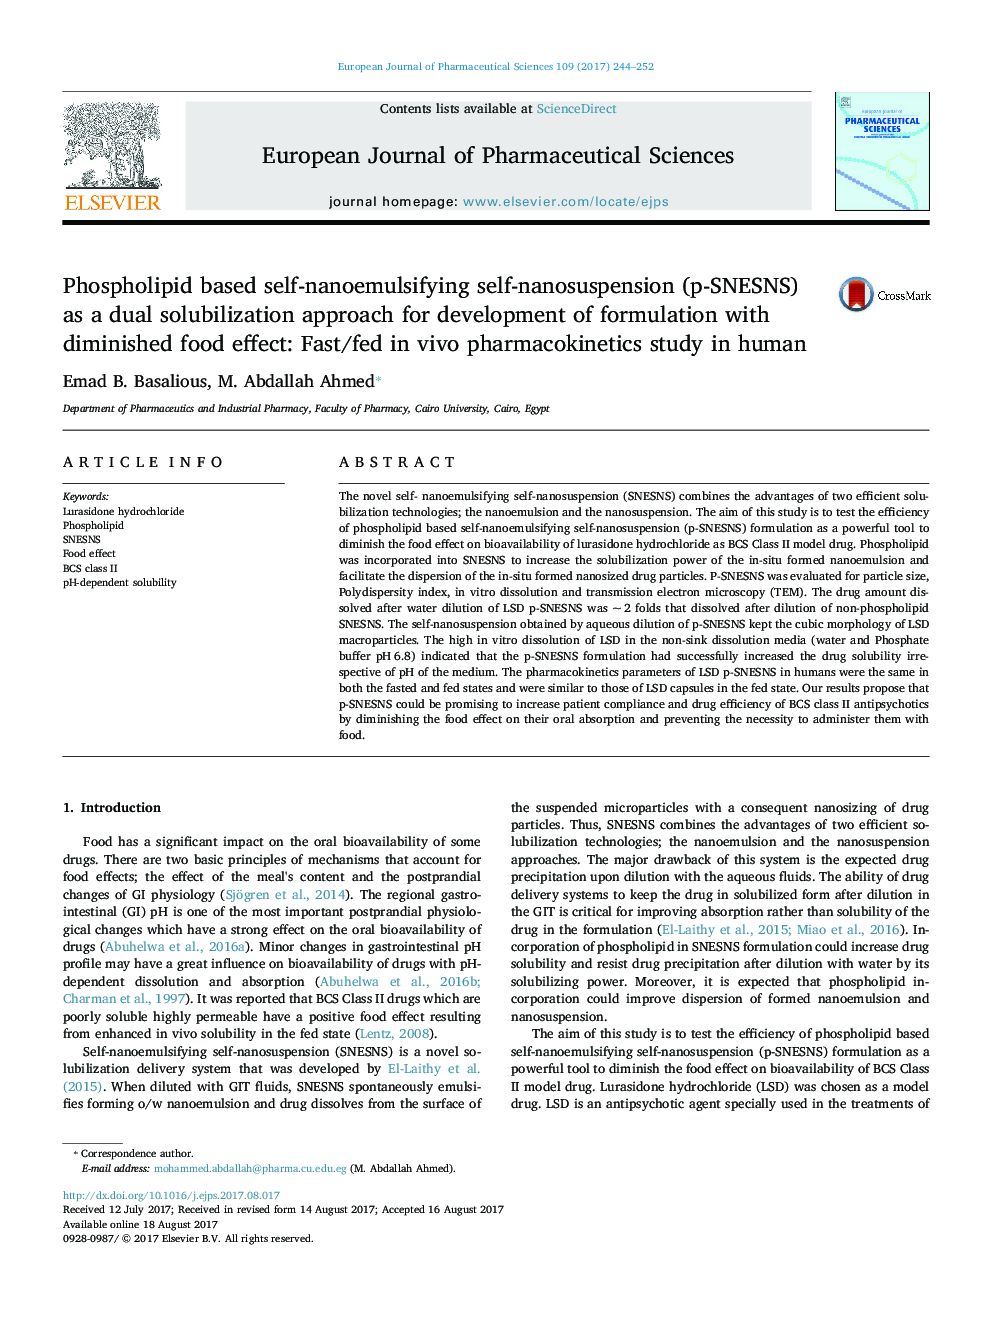 Phospholipid based self-nanoemulsifying self-nanosuspension (p-SNESNS) as a dual solubilization approach for development of formulation with diminished food effect: Fast/fed in vivo pharmacokinetics study in human